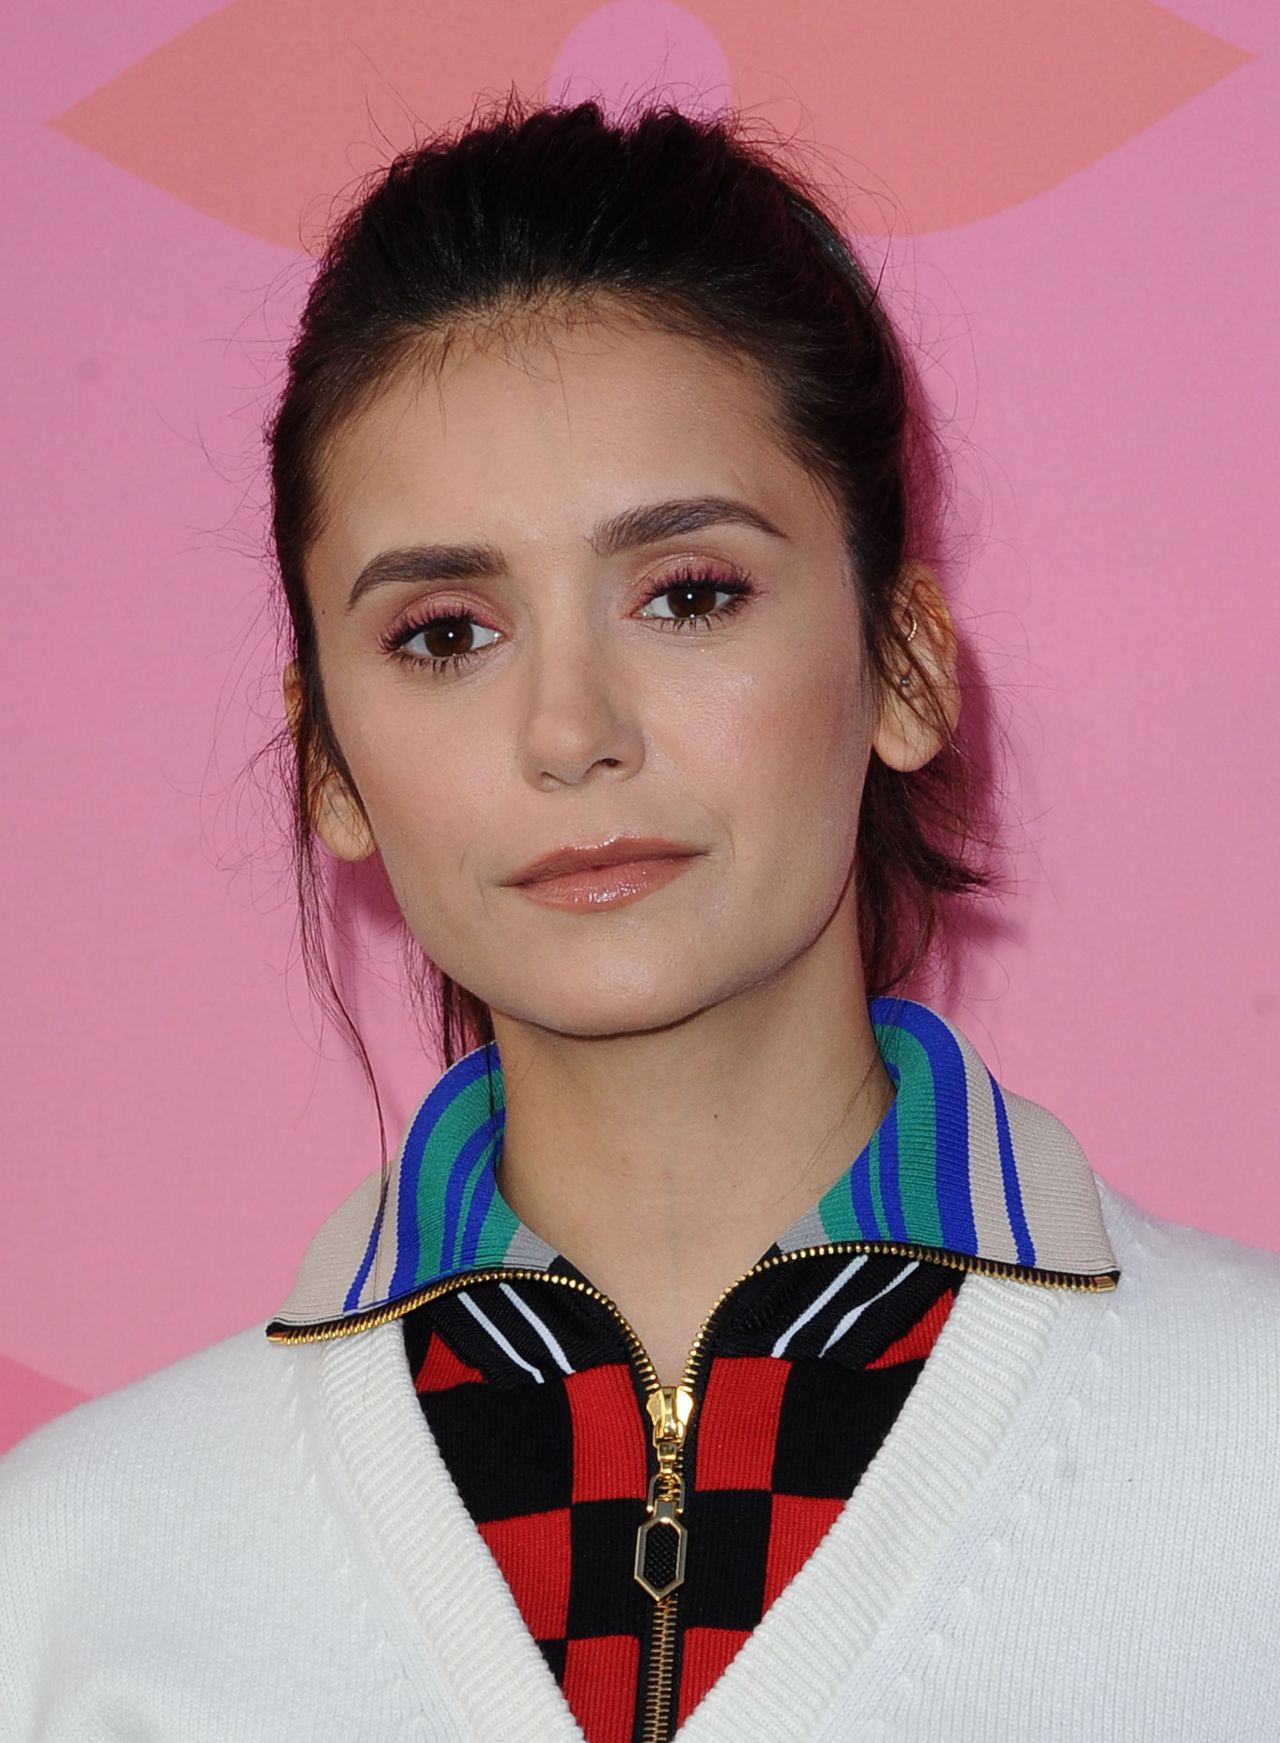 Nina Dobrev - Louis Vuitton X Opening Cocktail Party in Beverly Hills 06/27/2019